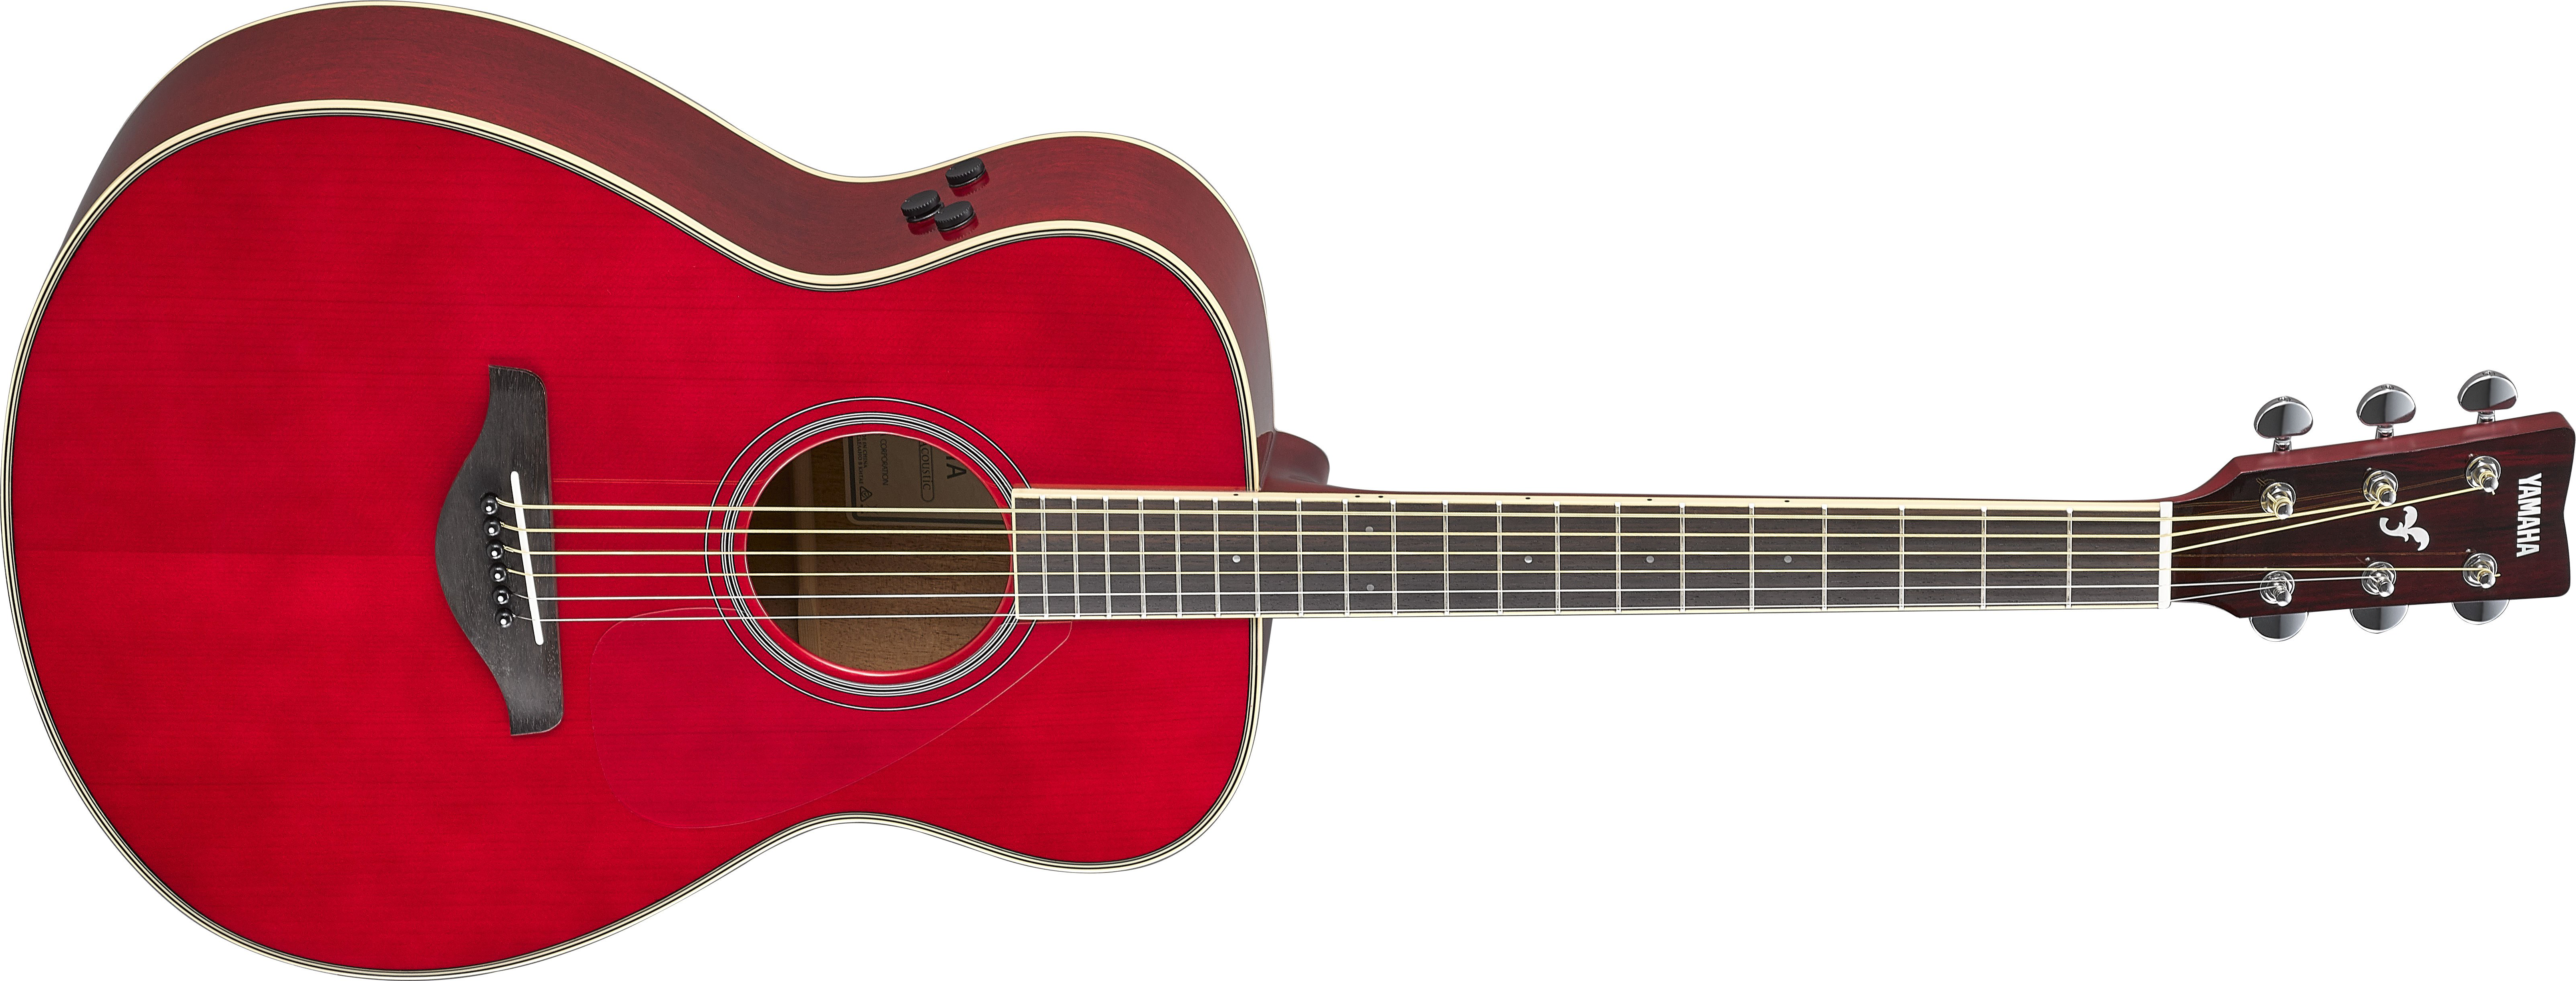 Yamaha FSTA RR Acoustic Electric Guitar Ruby Red